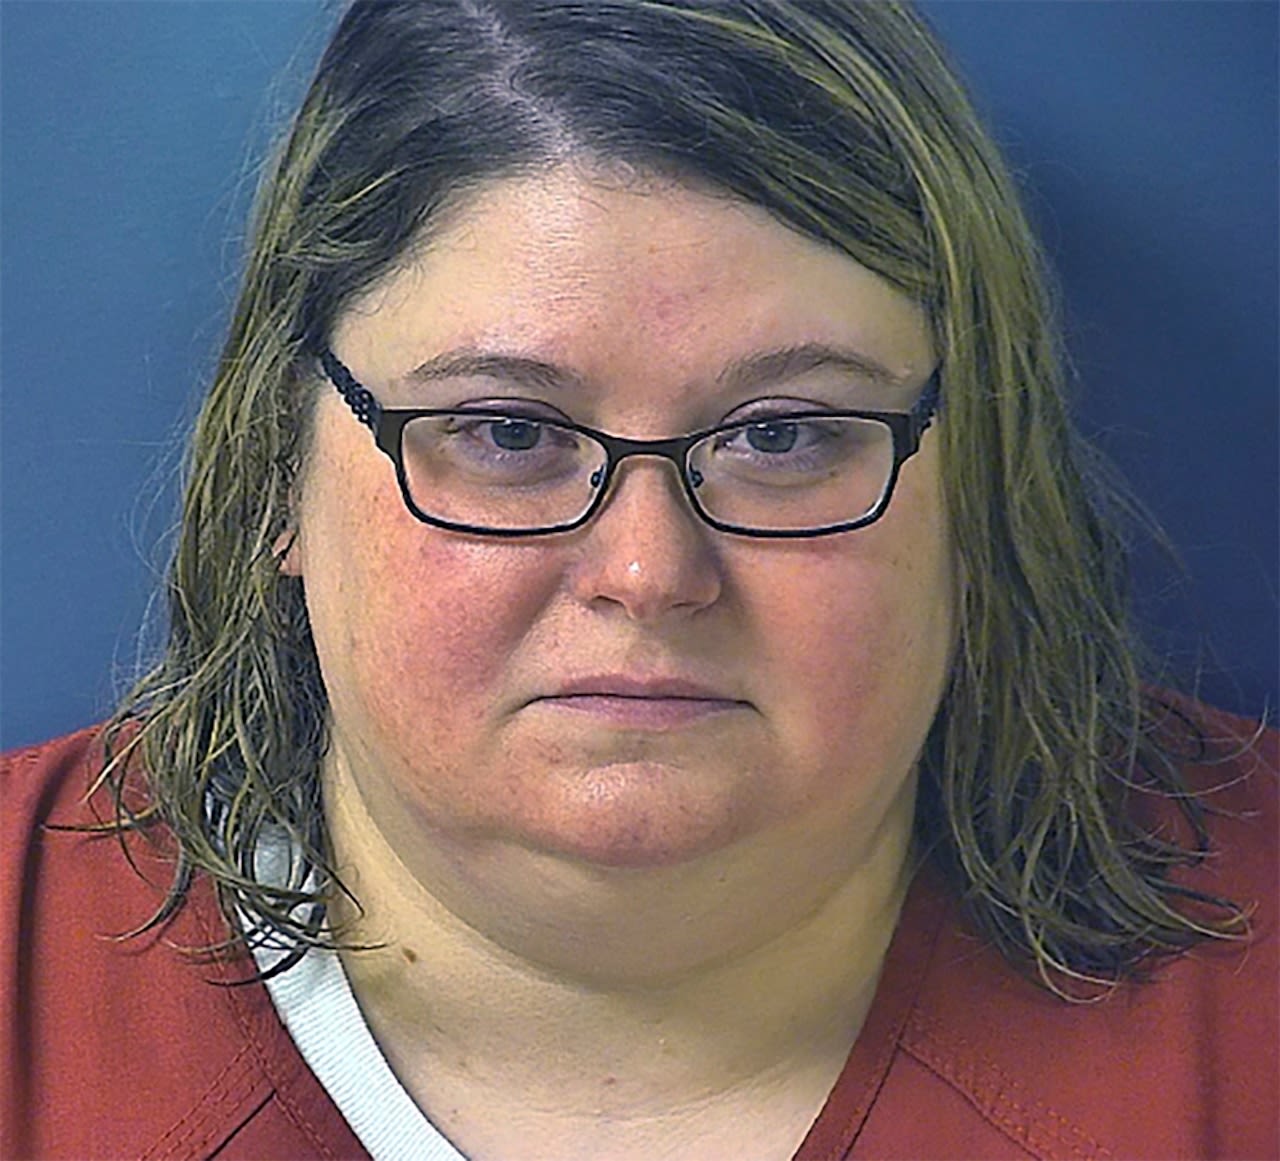 Pa. nurse who killed, harmed patients goes to prison for life